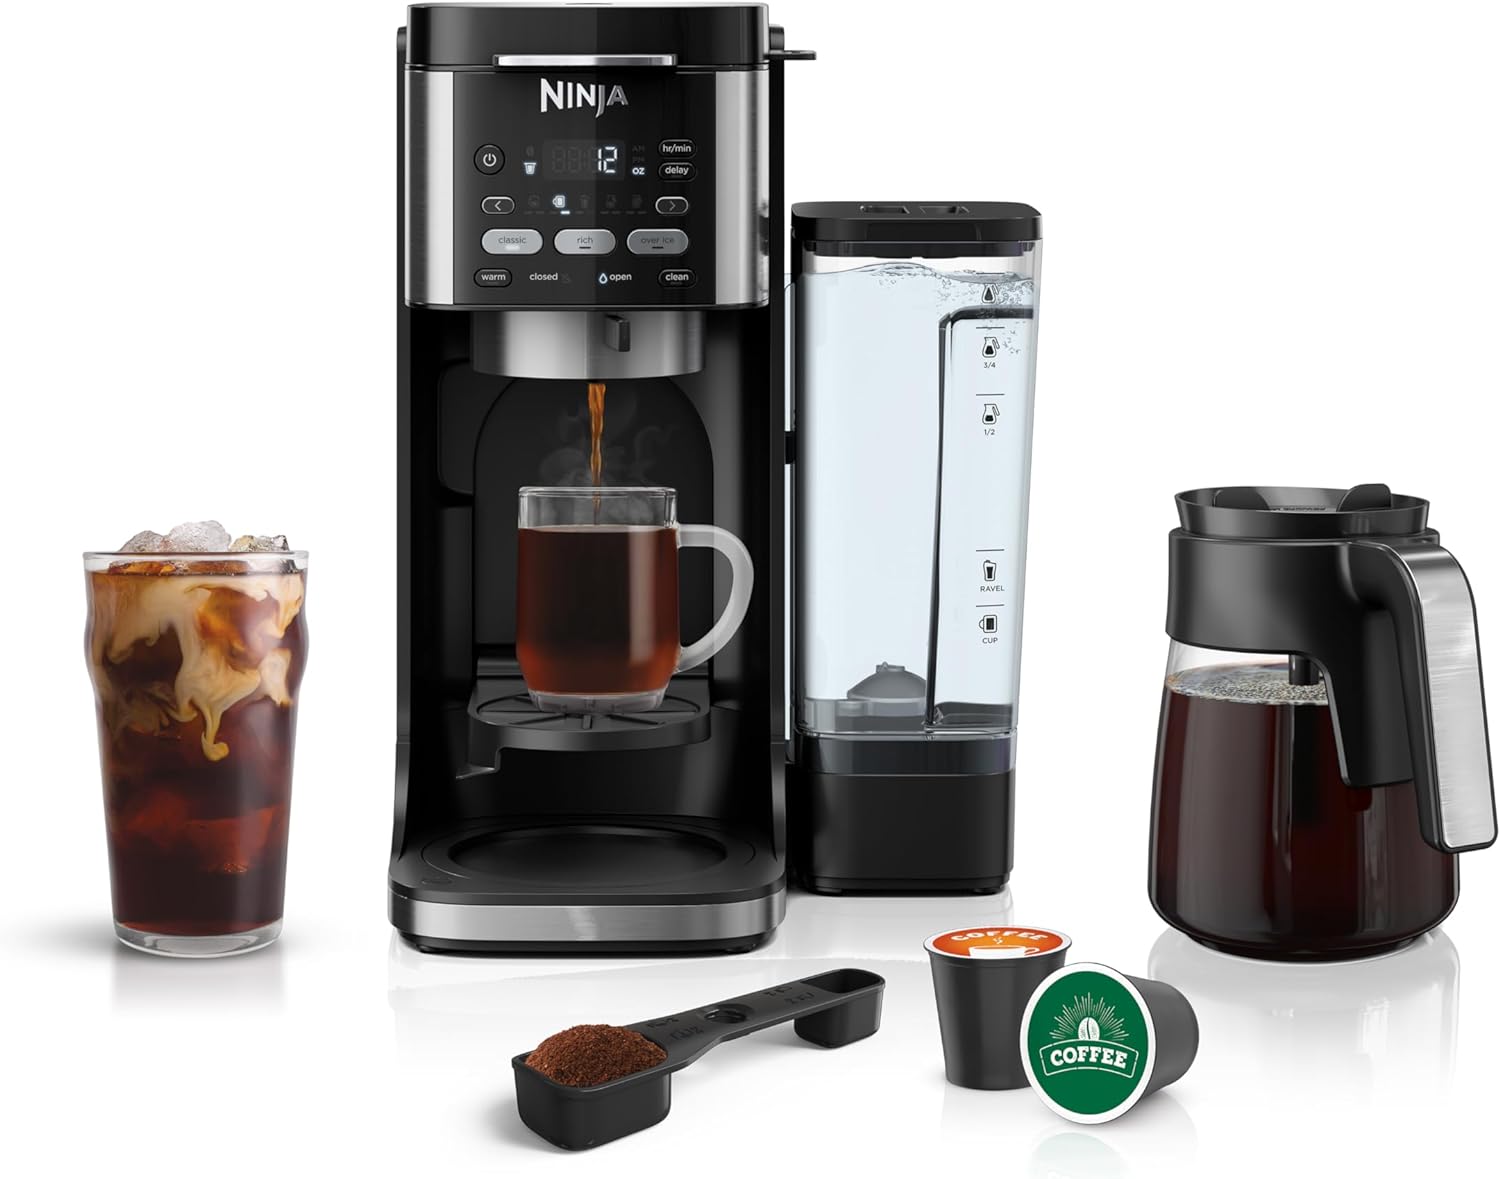 NINJA Dual Brew Coffee Maker - Ice Coffee - Hot Coffee - Compatible with K-Cups and 12-Cup Drip Coffee Maker